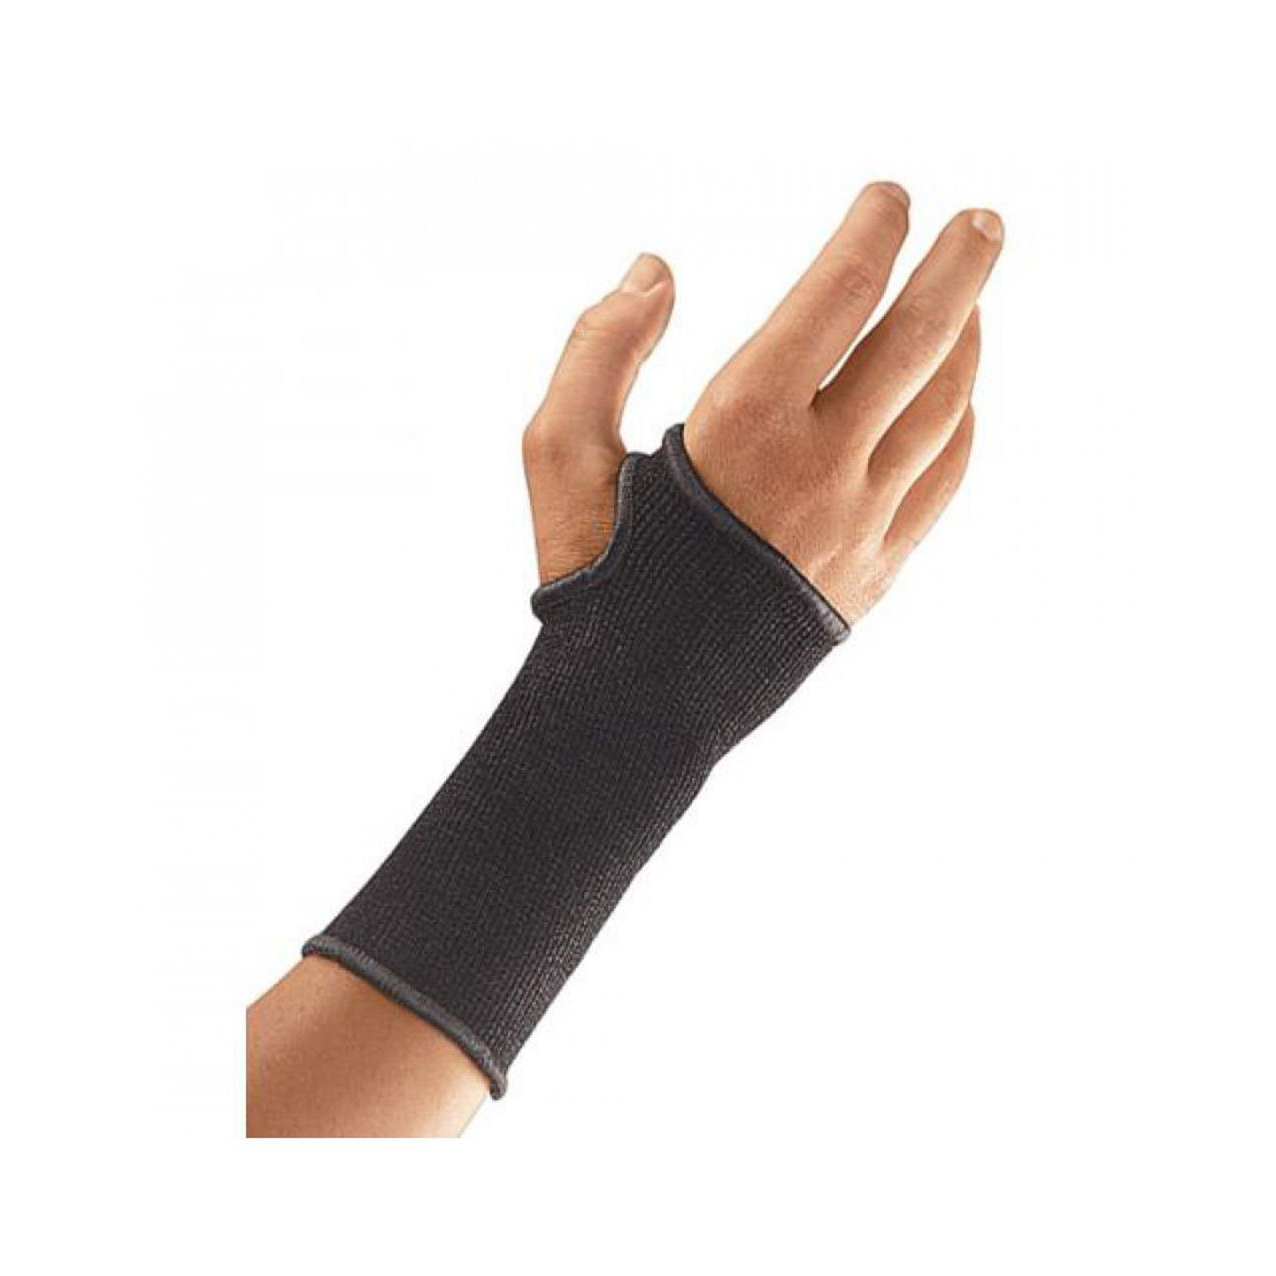 Mueller Elastic Wrist Support  Wrist Supports and Wrist Braces